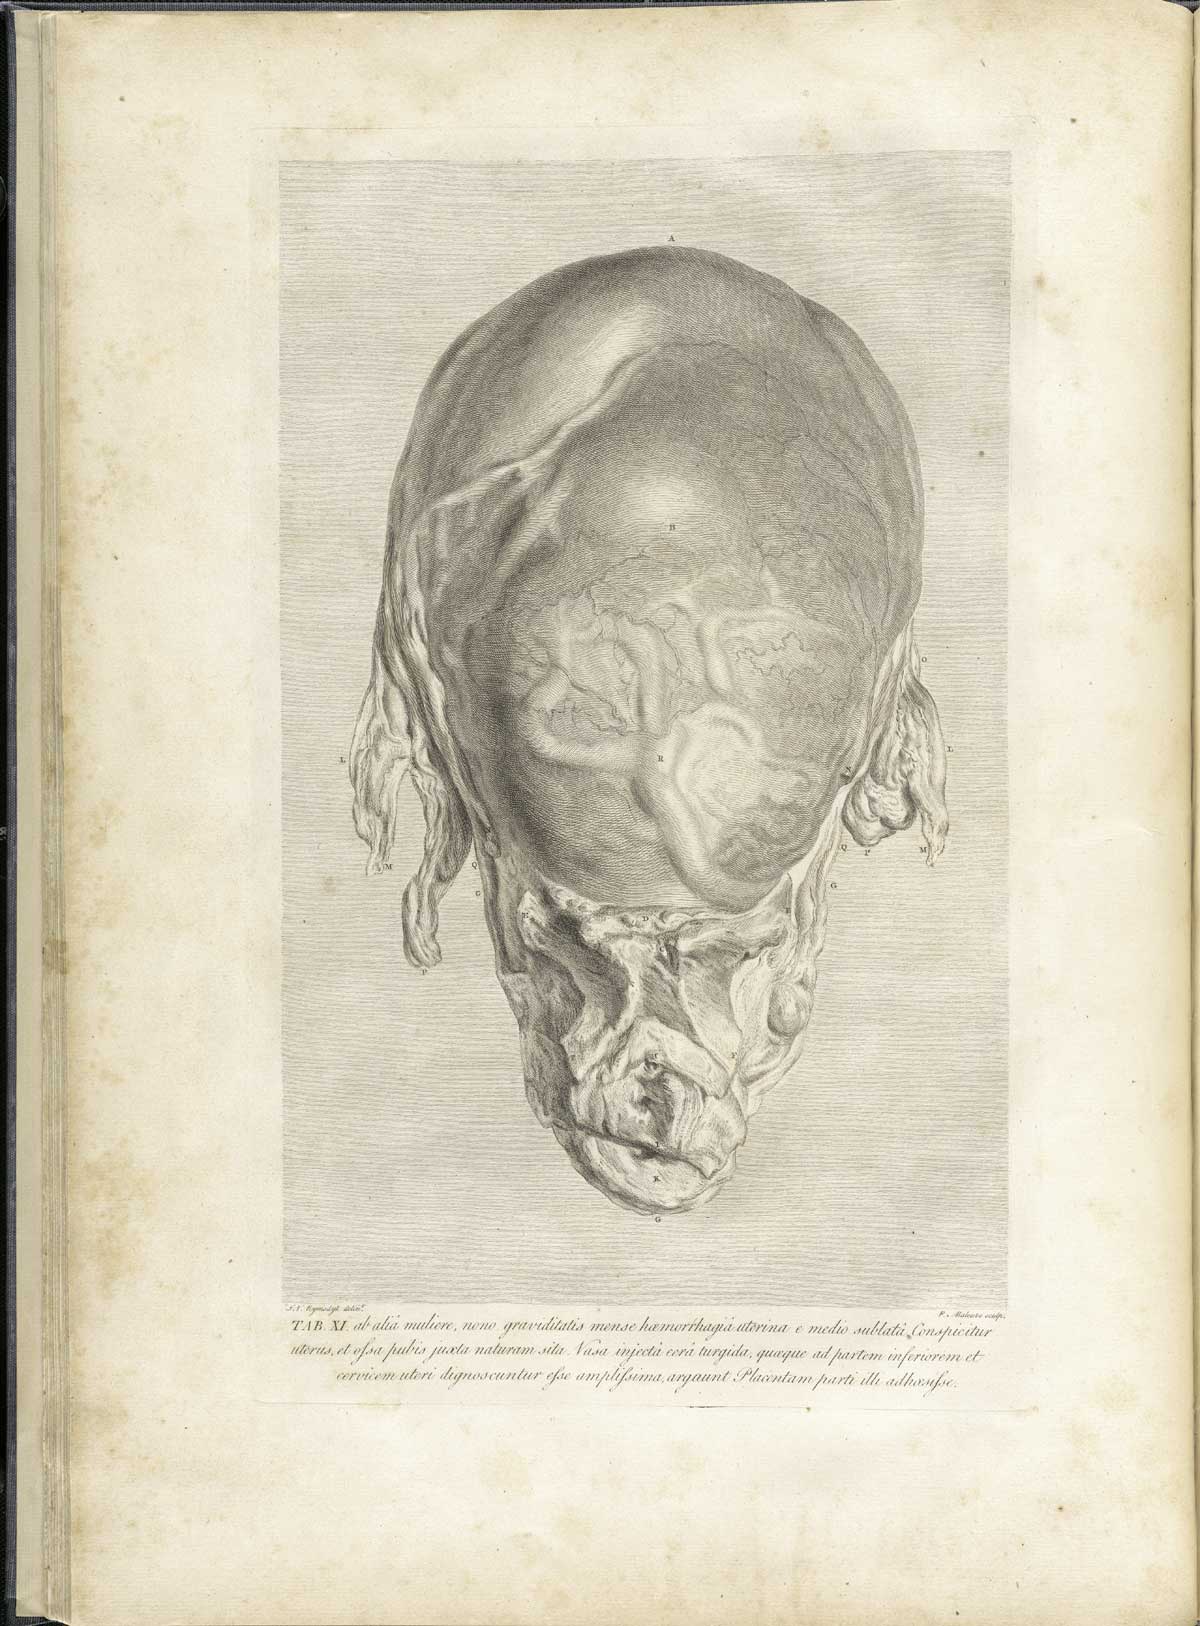 Table 11 of William Hunter's Anatomia uteri humani gravidi tabulis illustrata, featuring the left side view of female dissected with the uterus and birth canal exposed.